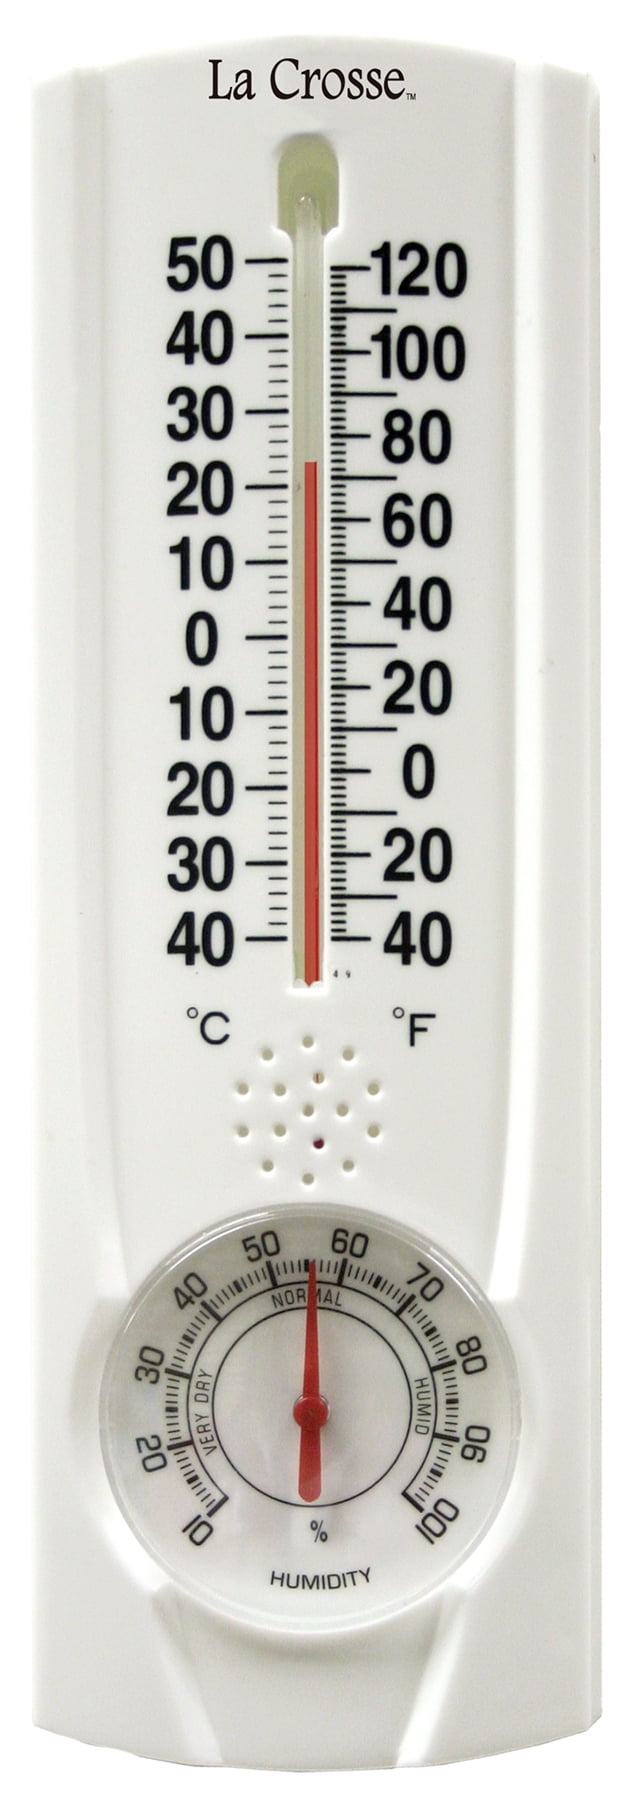 LaCrosse Technology 8.75 in. Thermometer/Hygrometer - Walmart.com